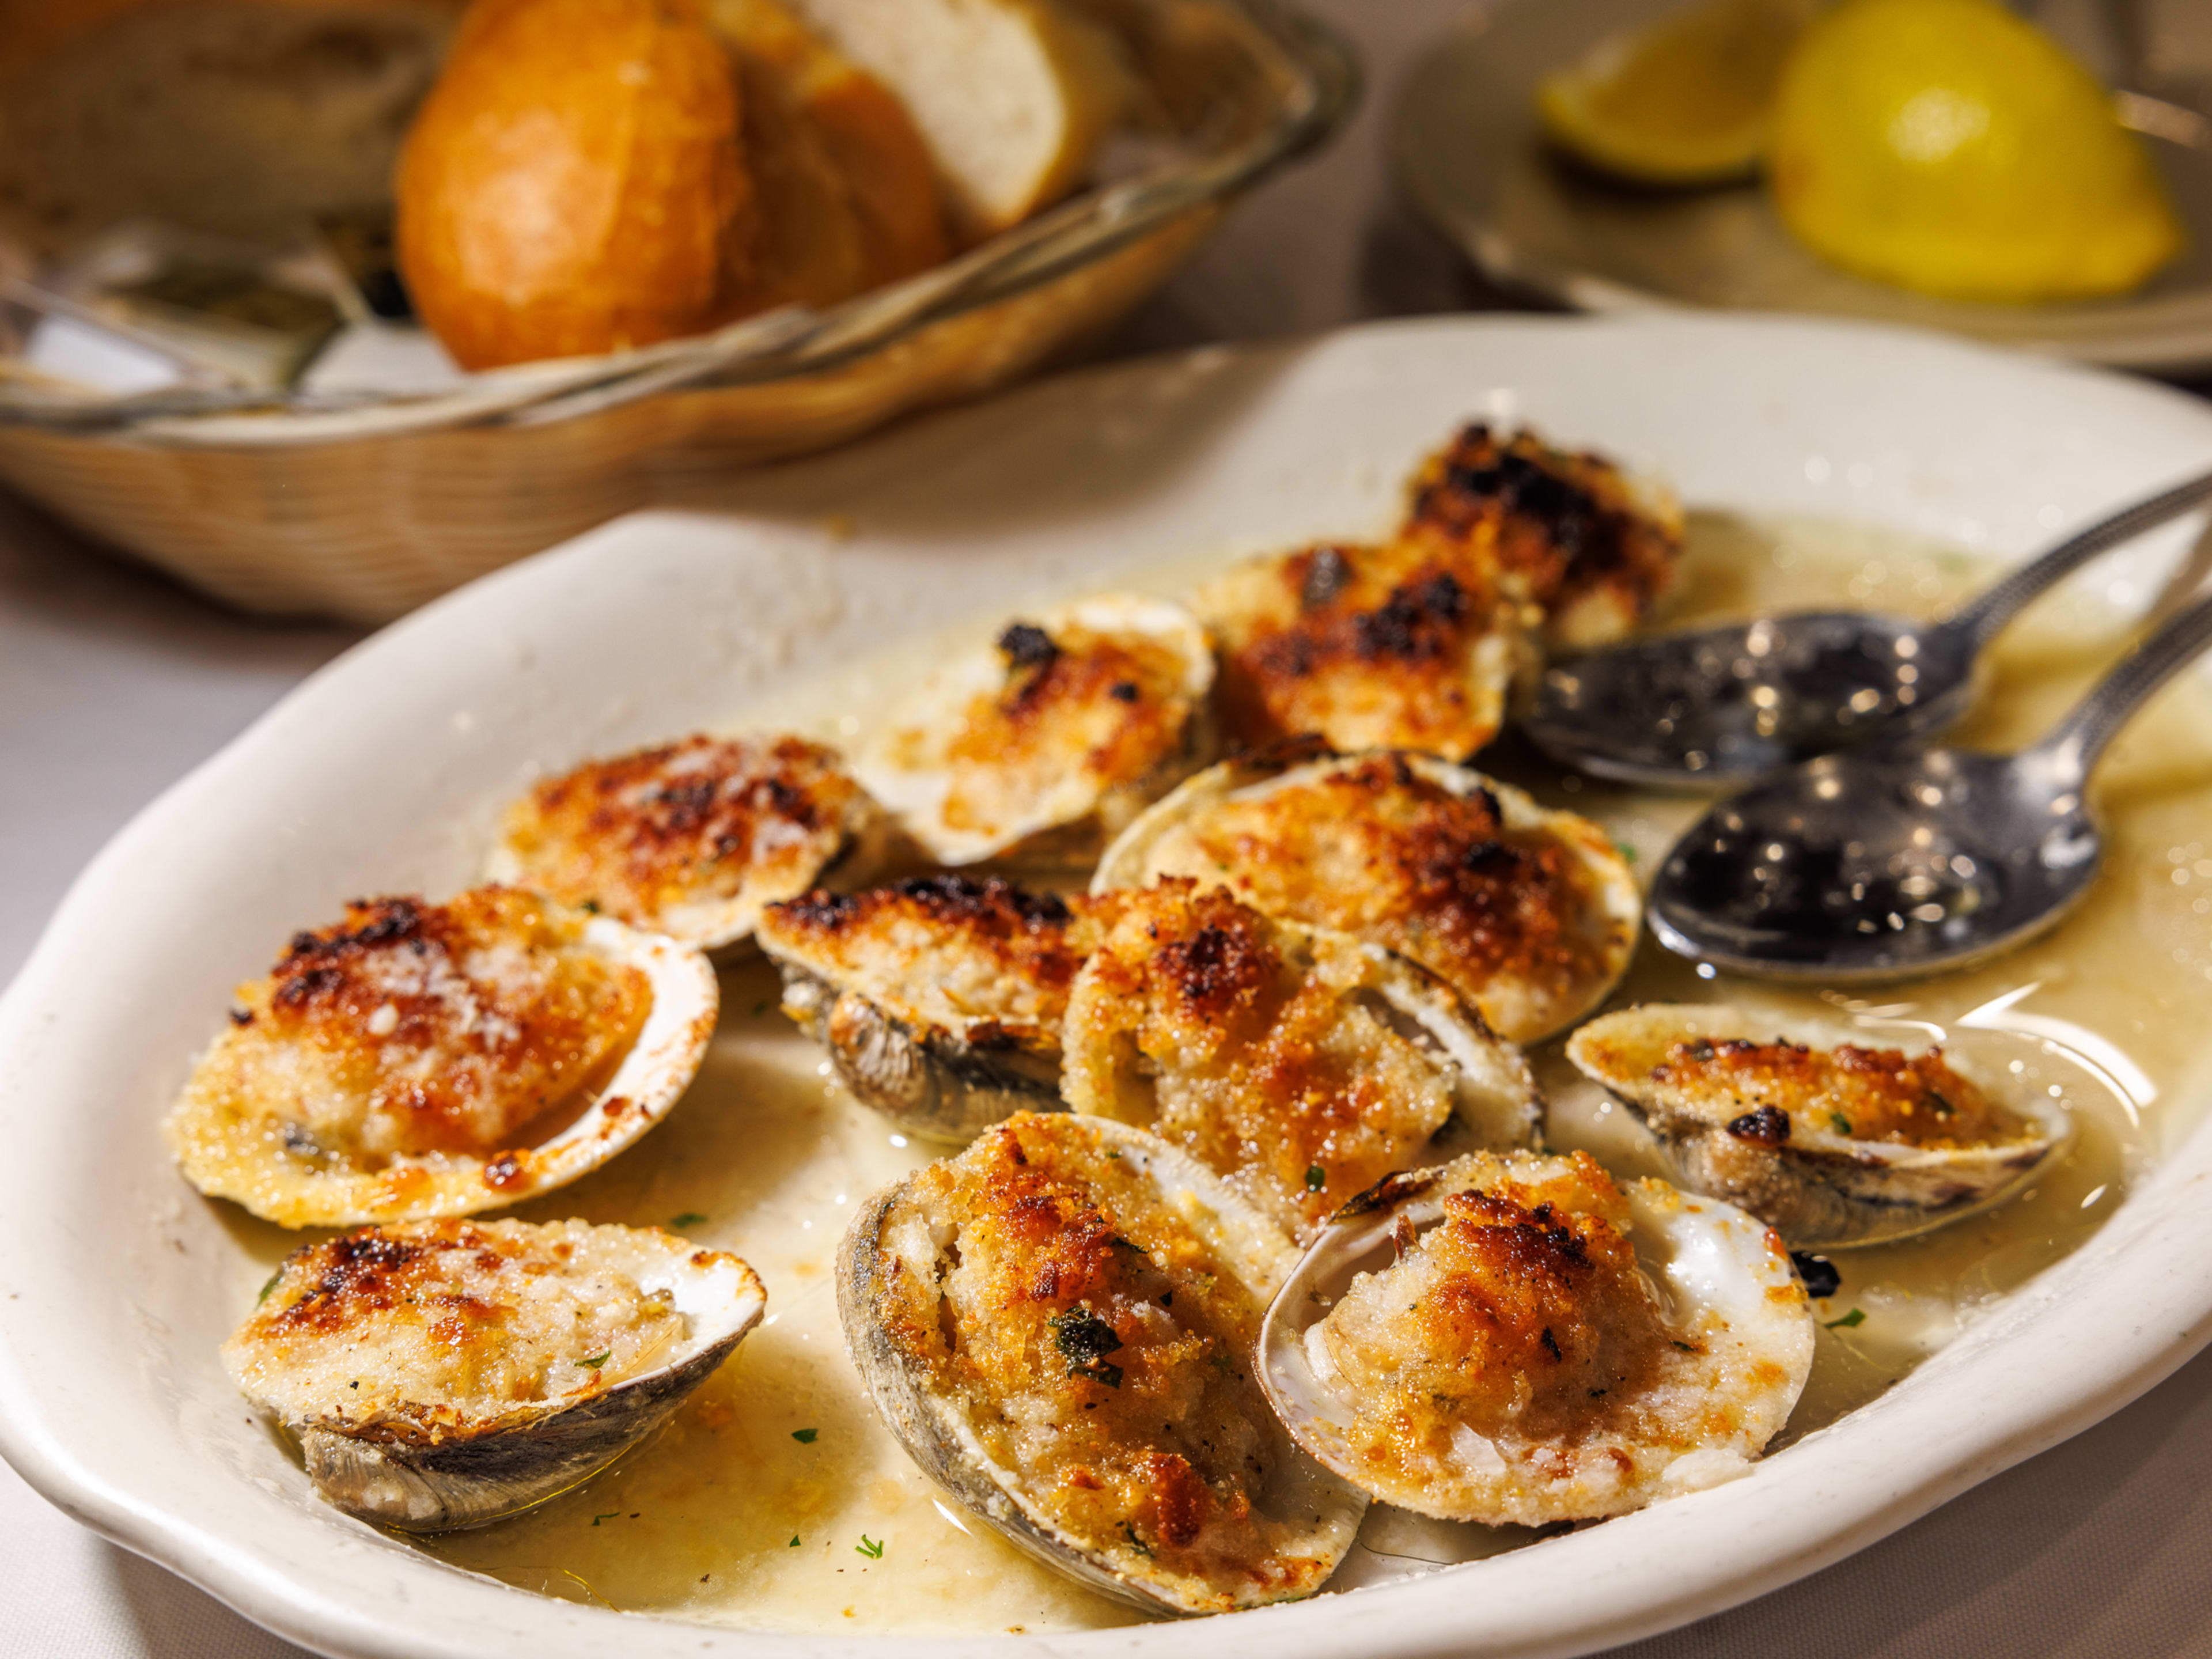 Baked clams at Don Peppe.